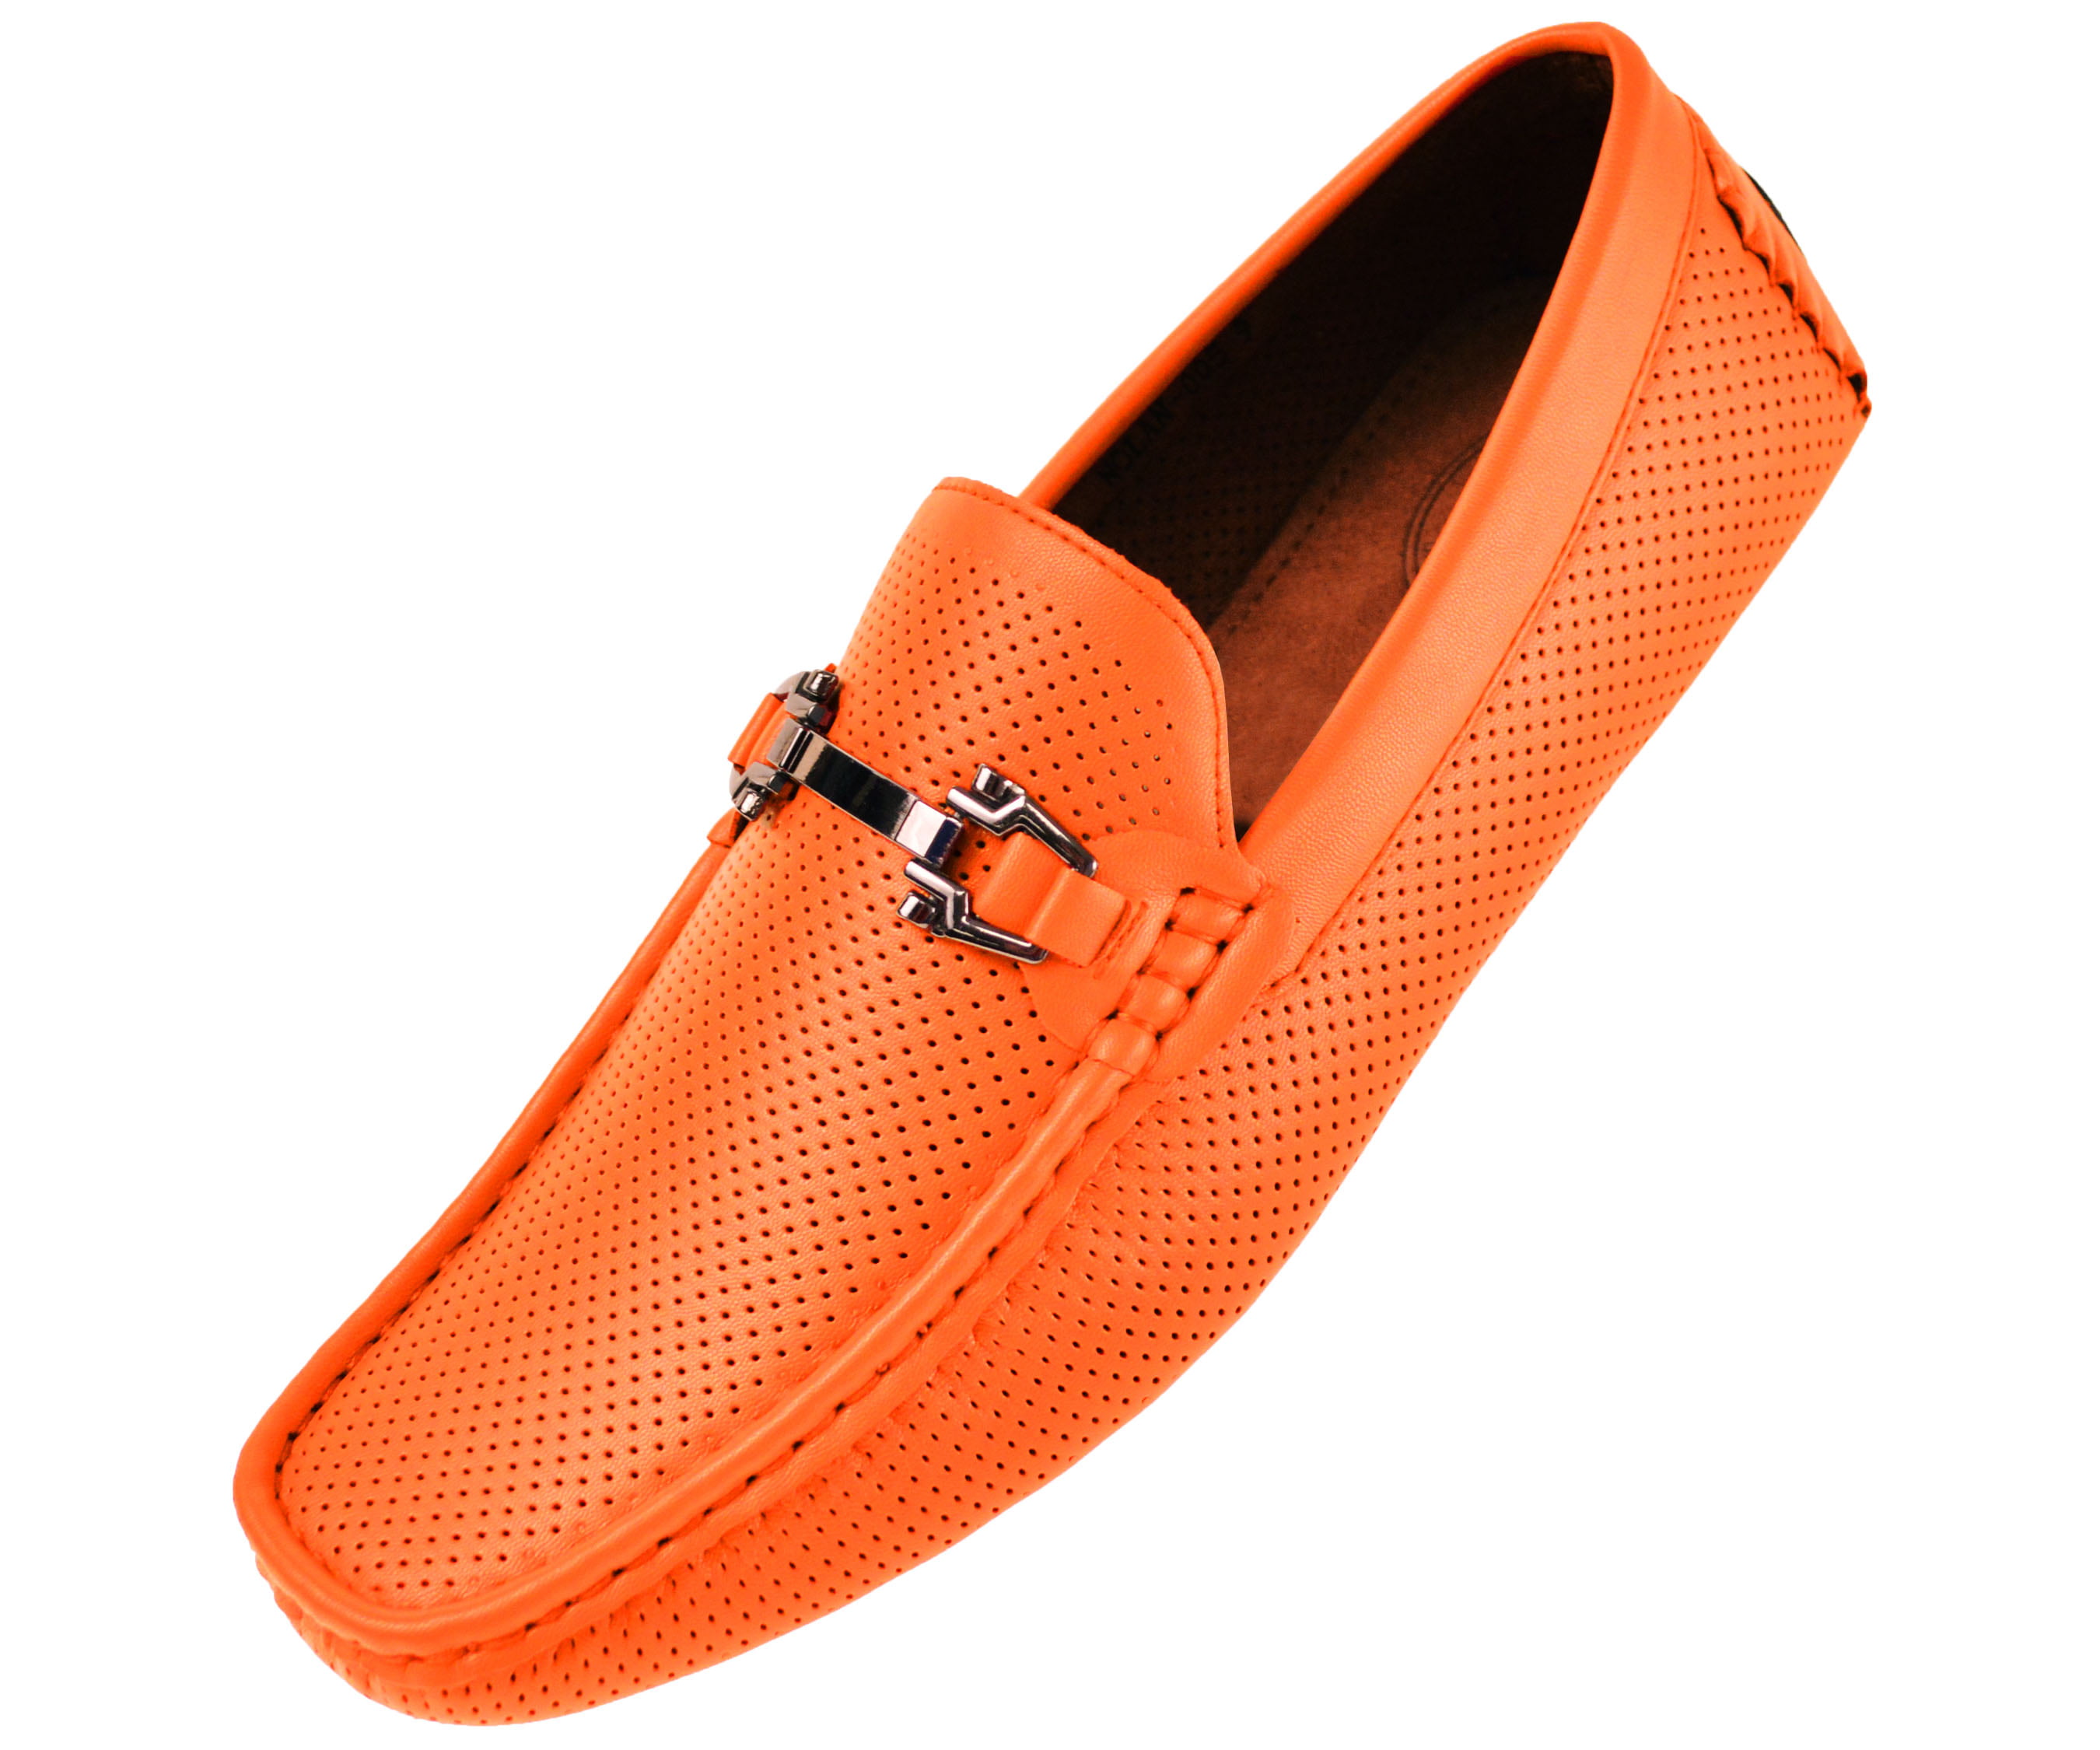 Comfortable Loafer Shoe Style Nolan Casual Driving Moccasin Amali The Original Mens Perforated Smooth Driver